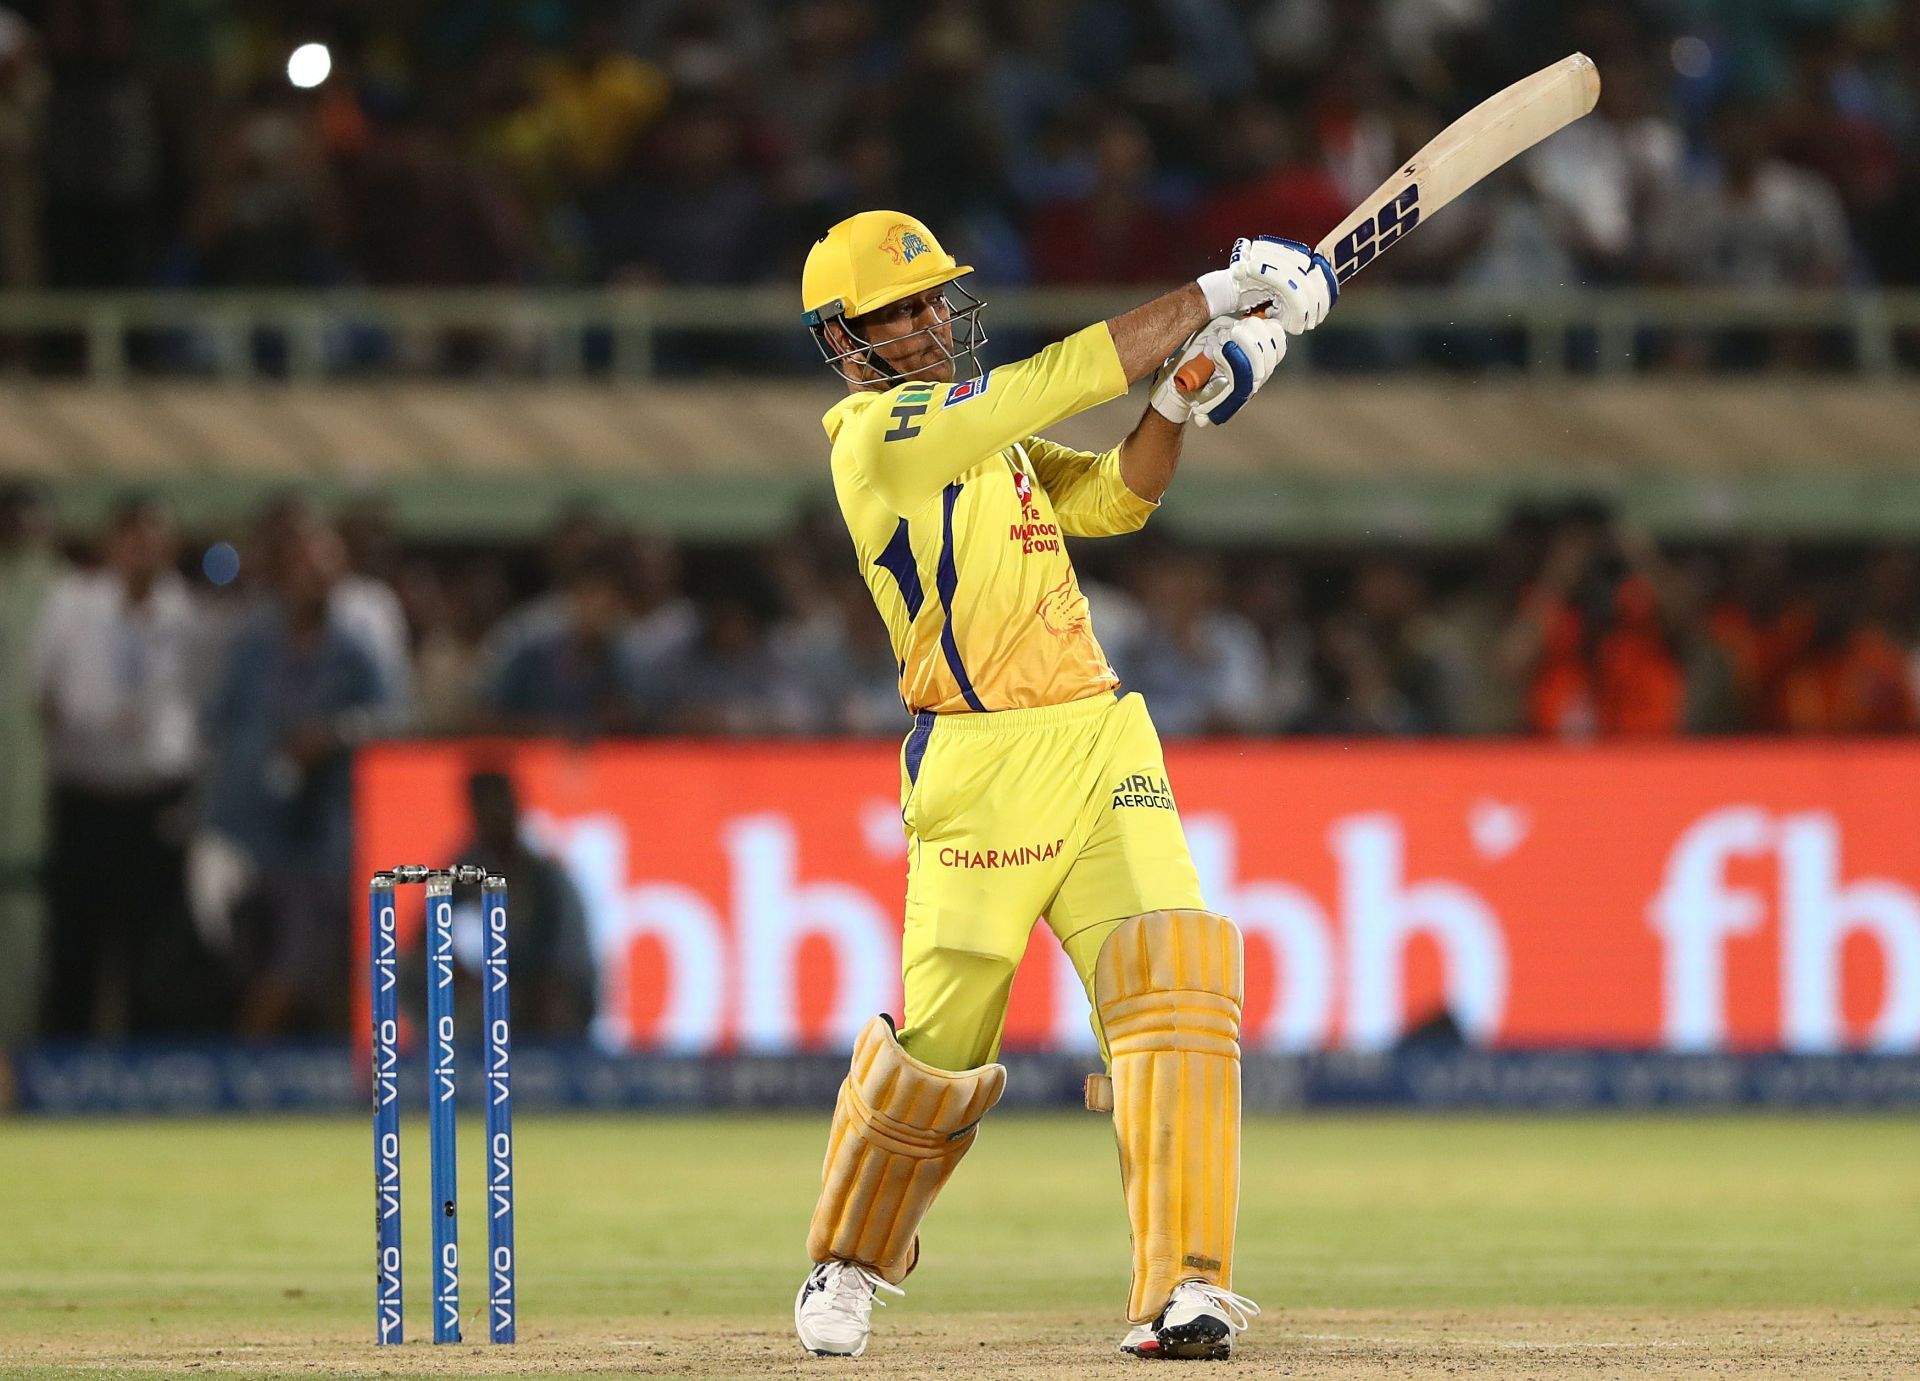 MS Dhoni will return to action tonight at the Wankhede Stadium (Image courtesy: Getty Images)